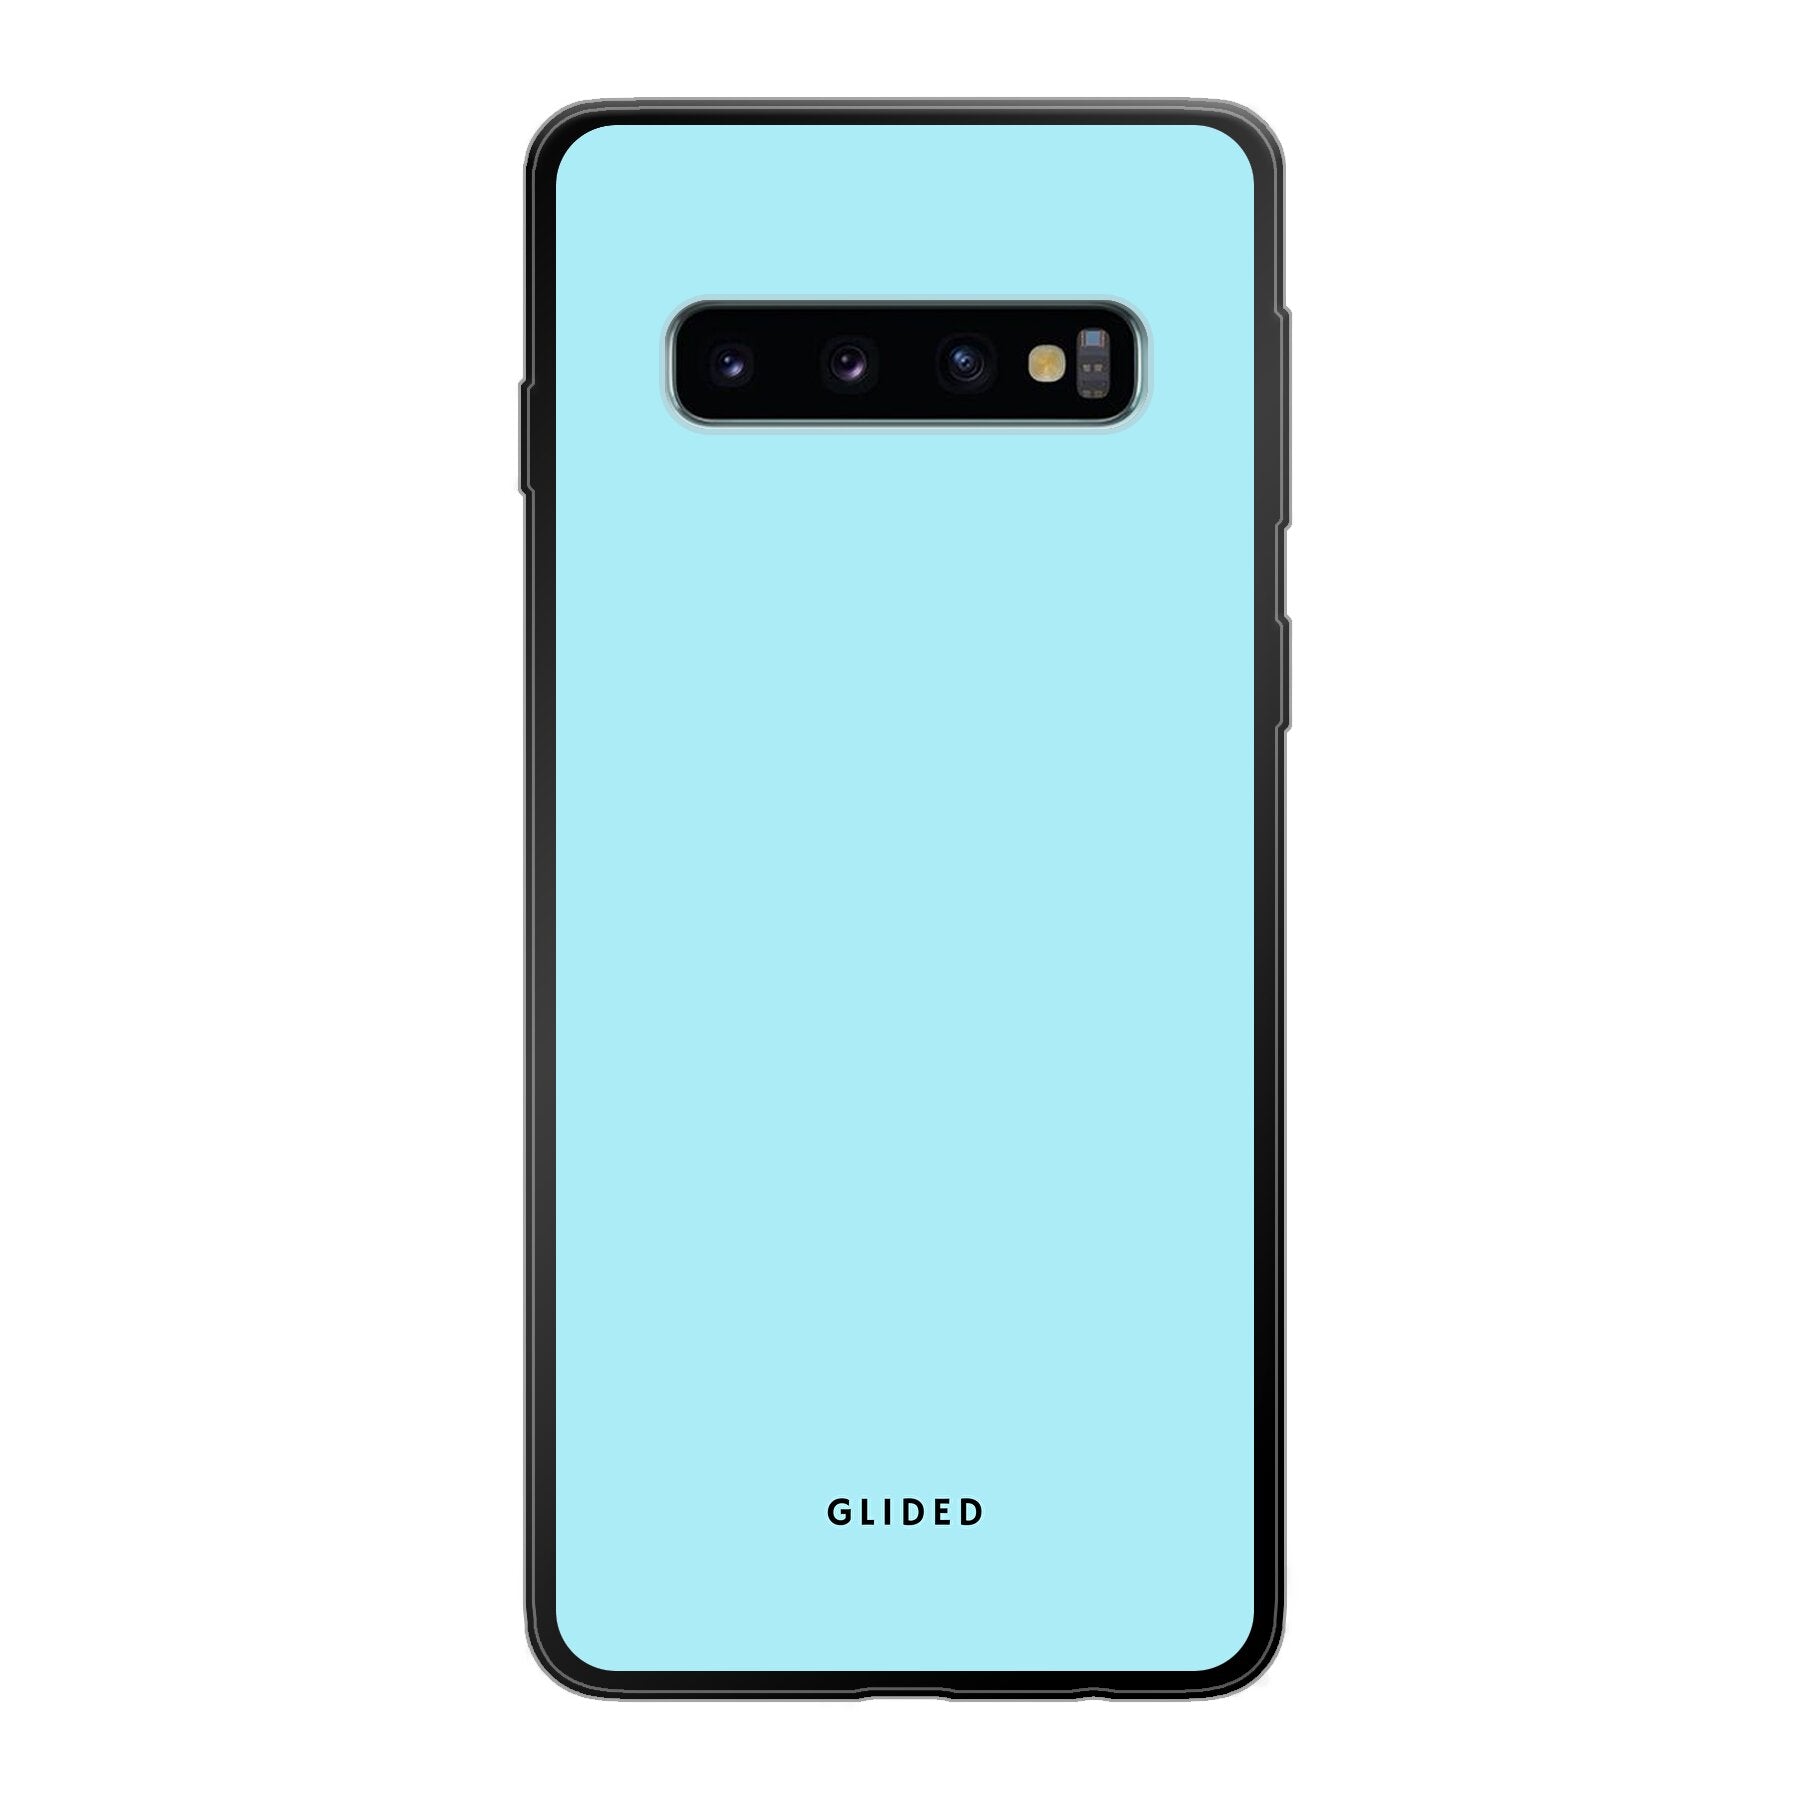 Turquoise Touch - Samsung Galaxy S10 Handyhülle Soft case